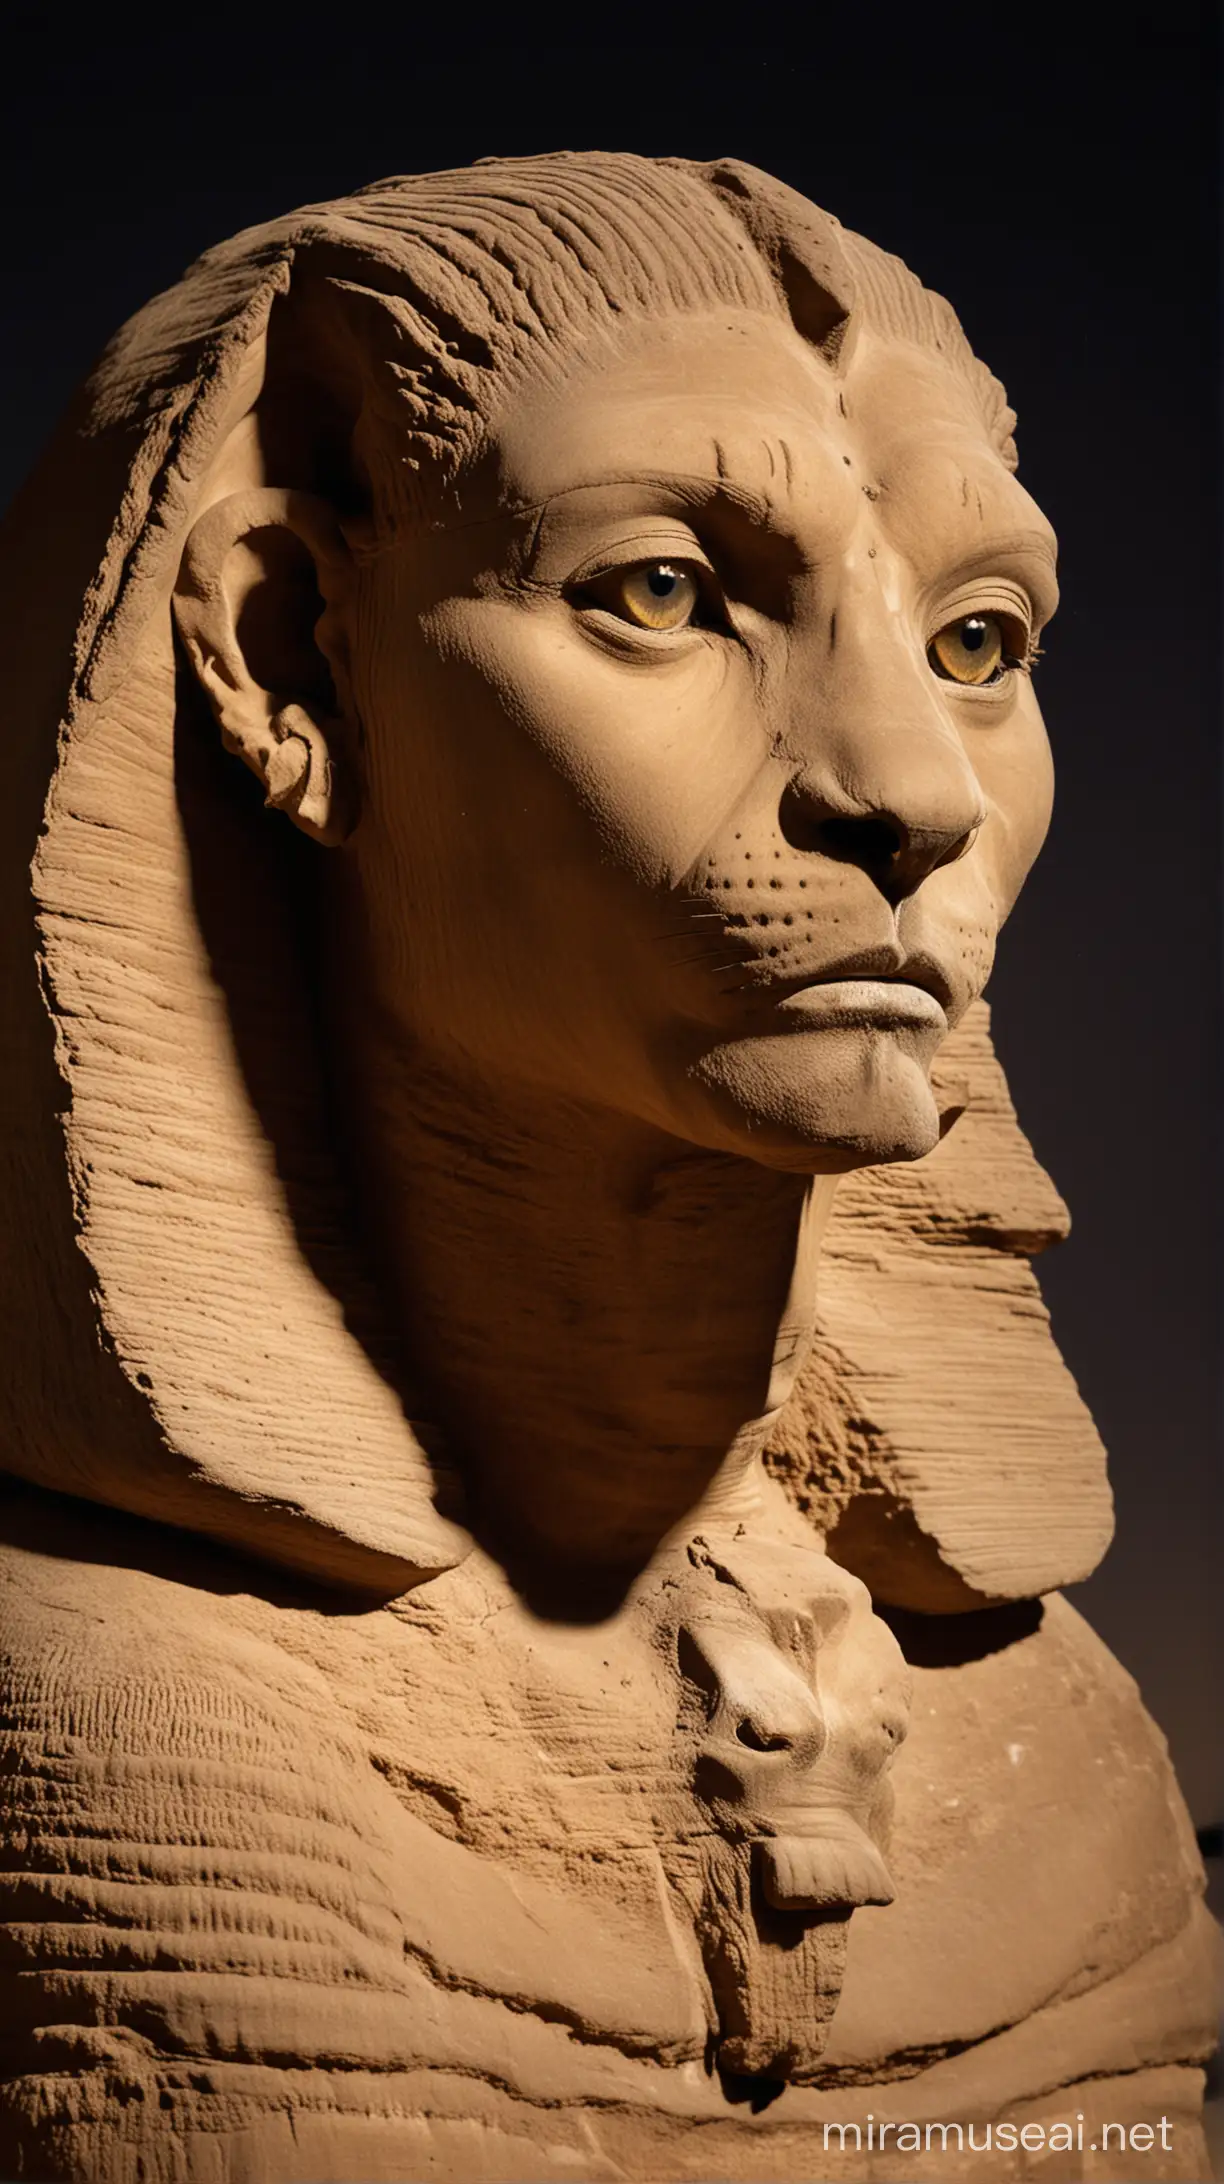 A mysterious Sphinx, above neck human and below neck-lion, with piercing eyes that seem to glow in the darkness.